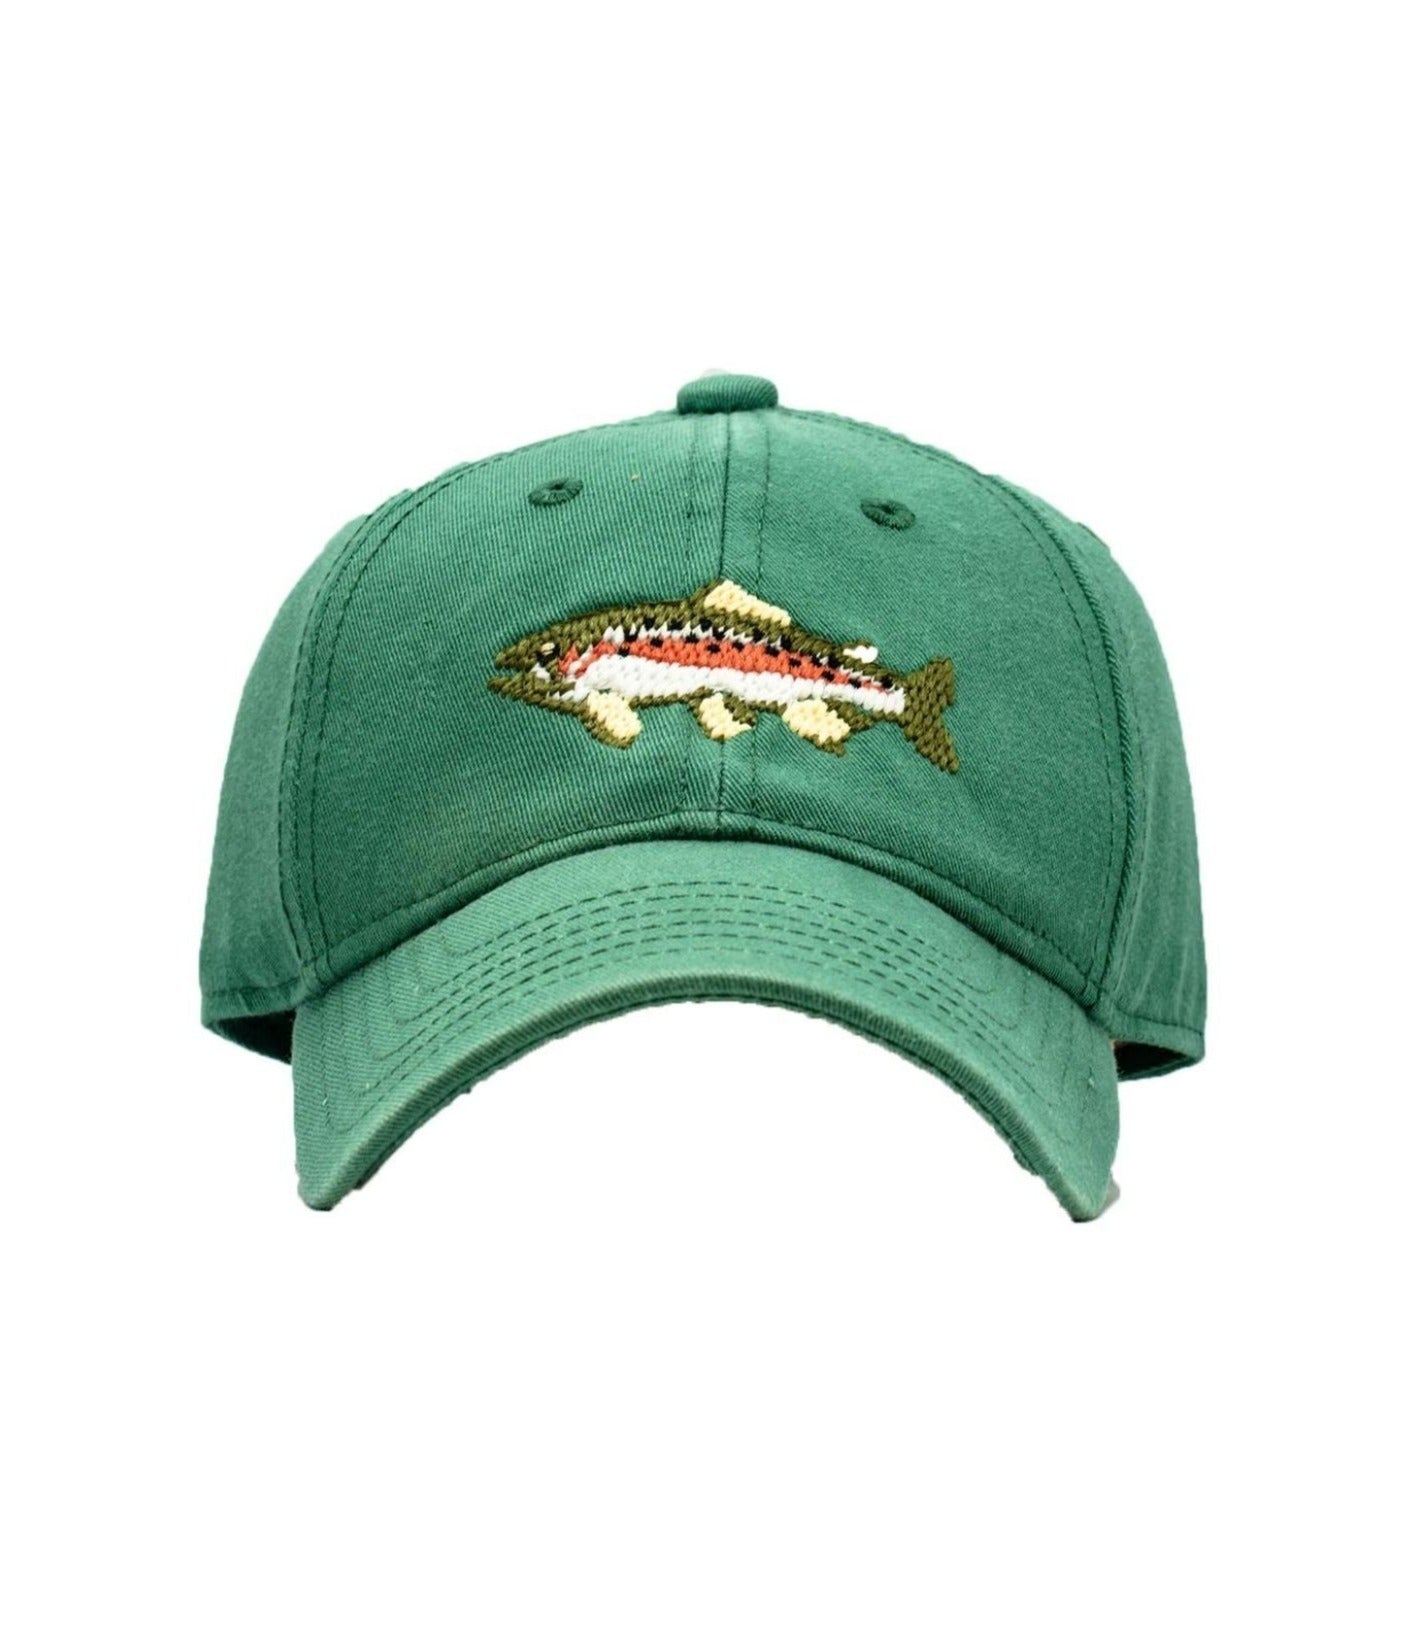 moss green hat with trout fish